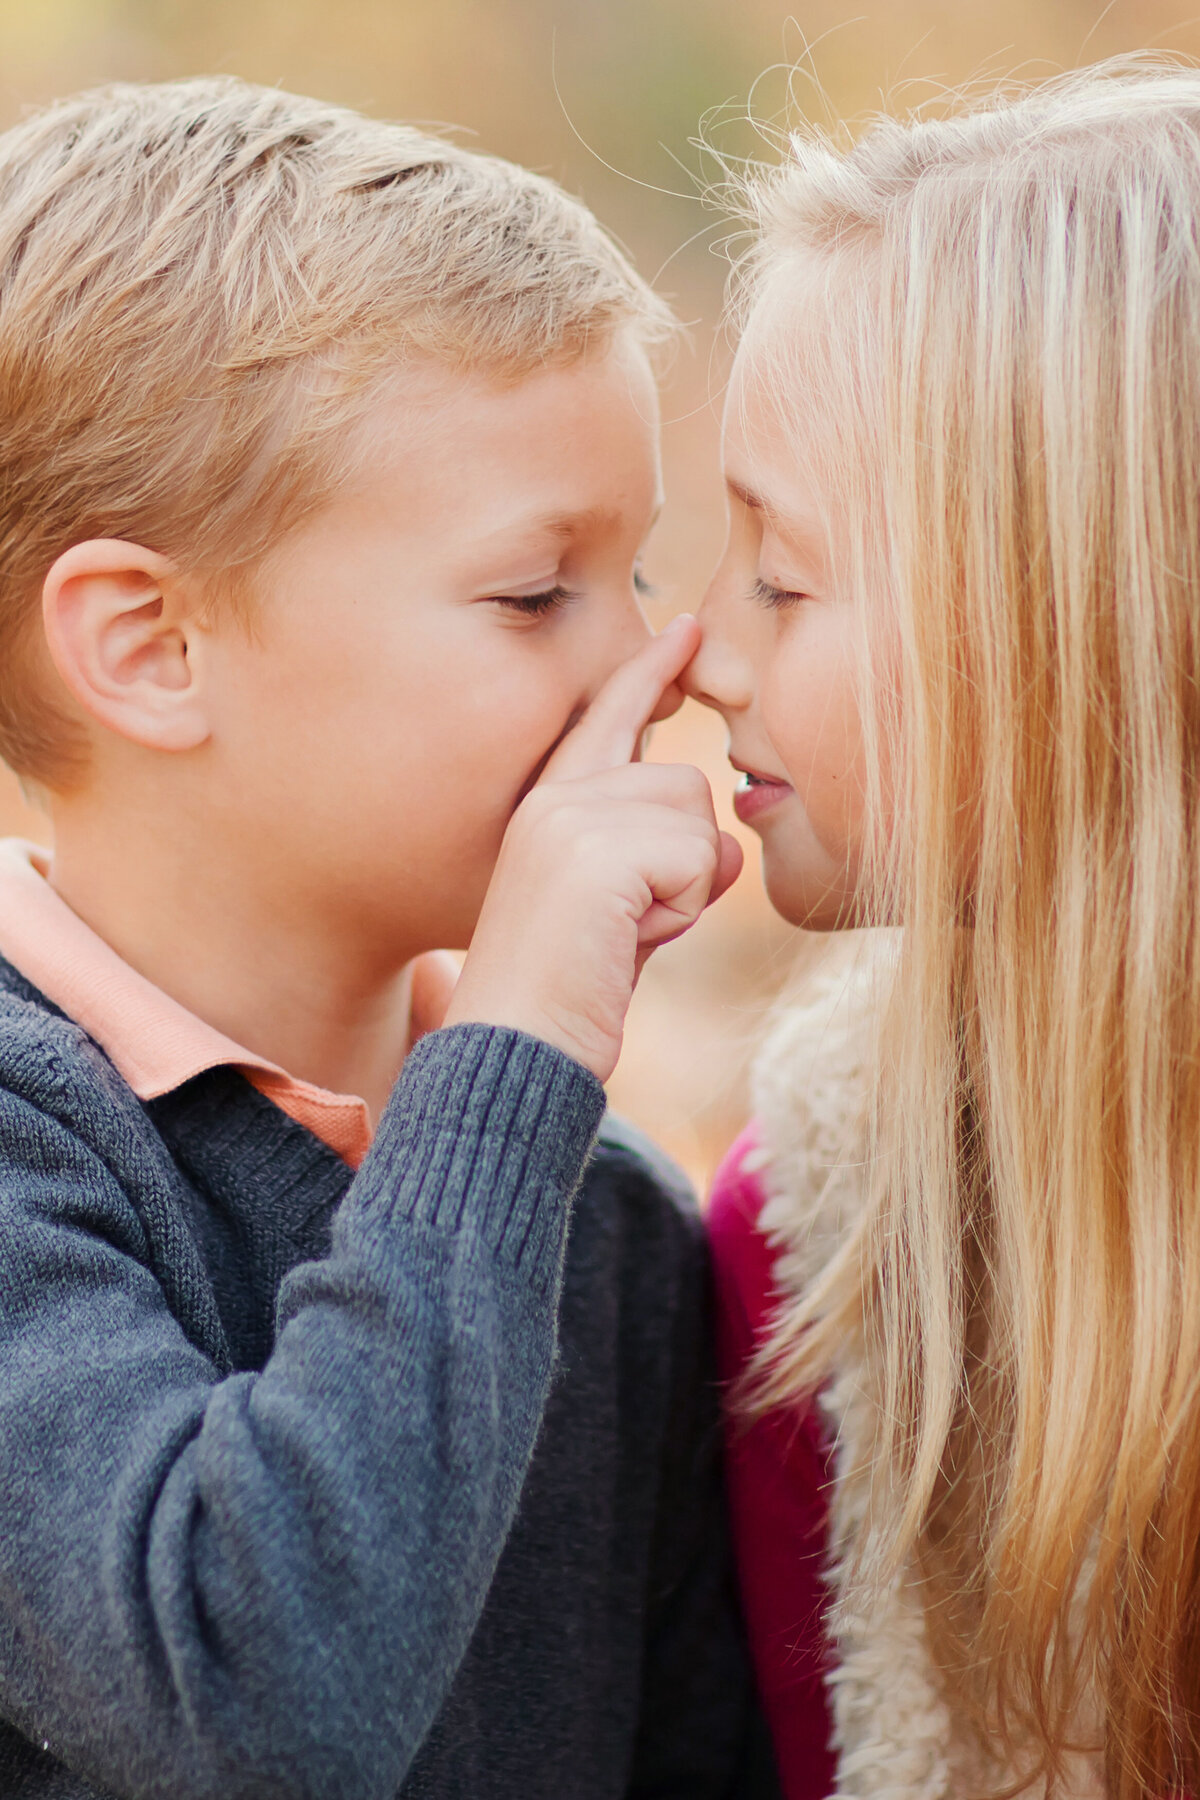 Siblings are nose-to-nose, and he is gently touching her nose with his finger in this sweet photo.